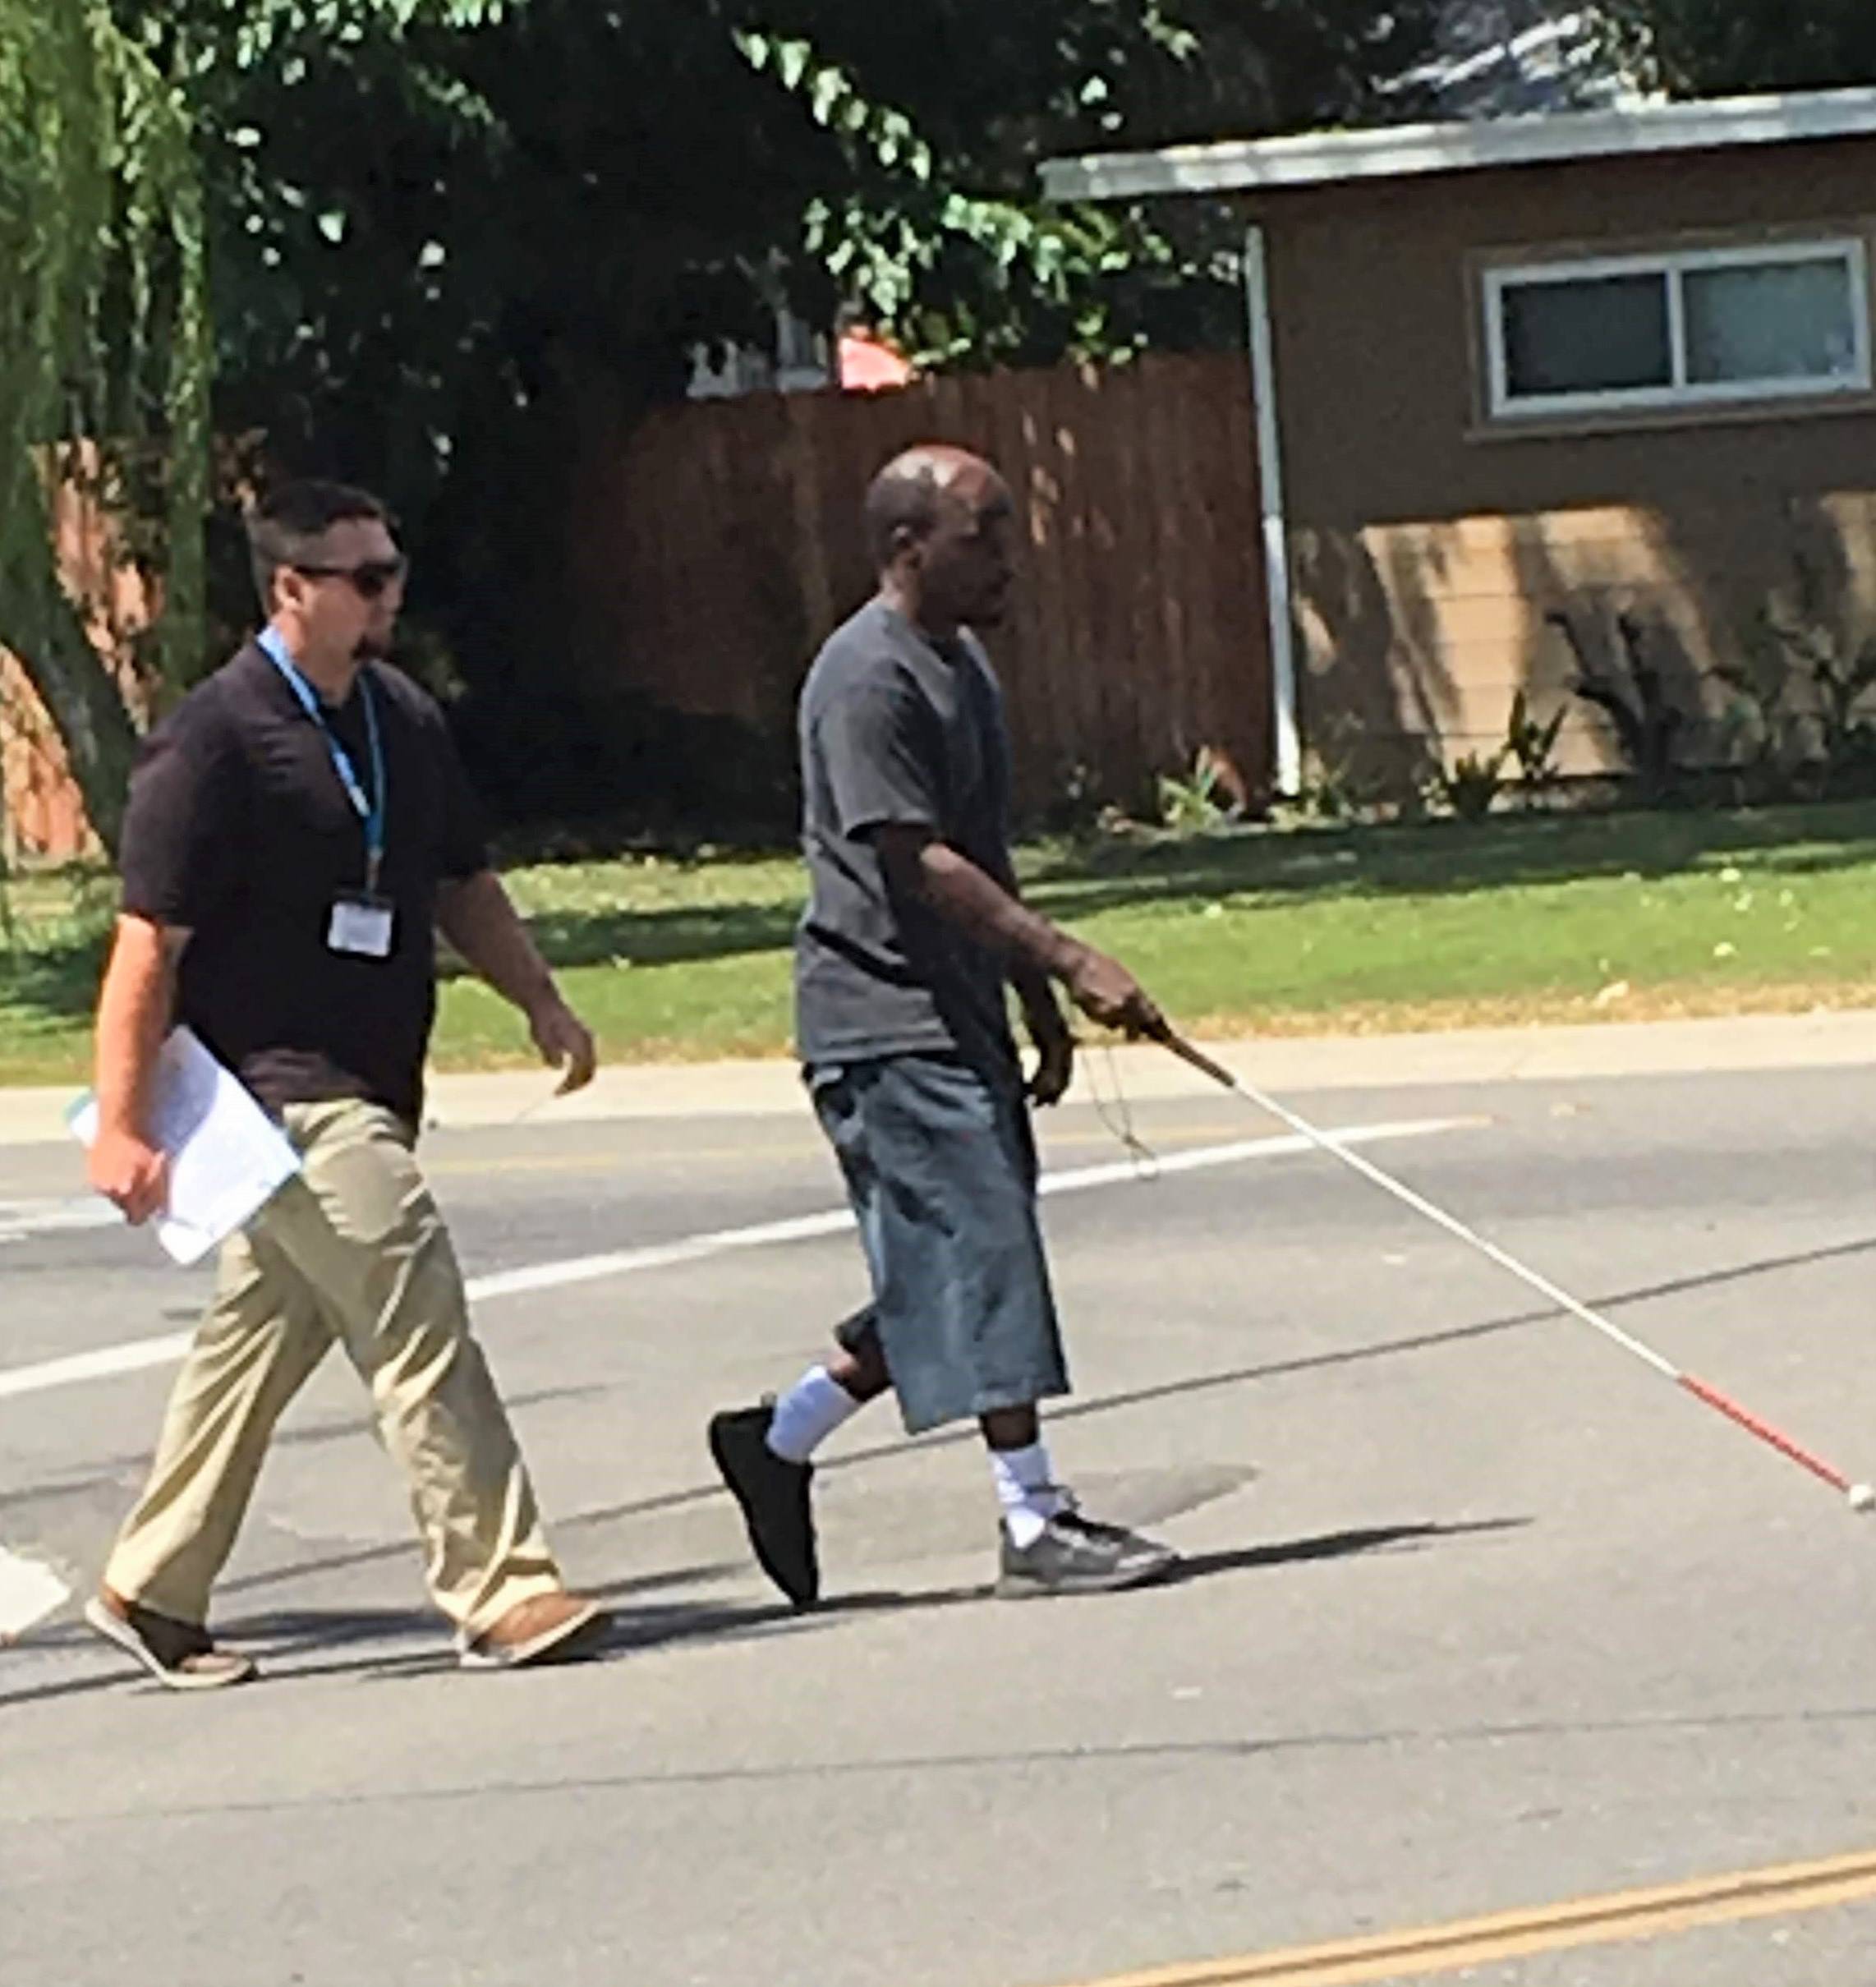 An orientation and mobility student crosses the street as his instructor follows.